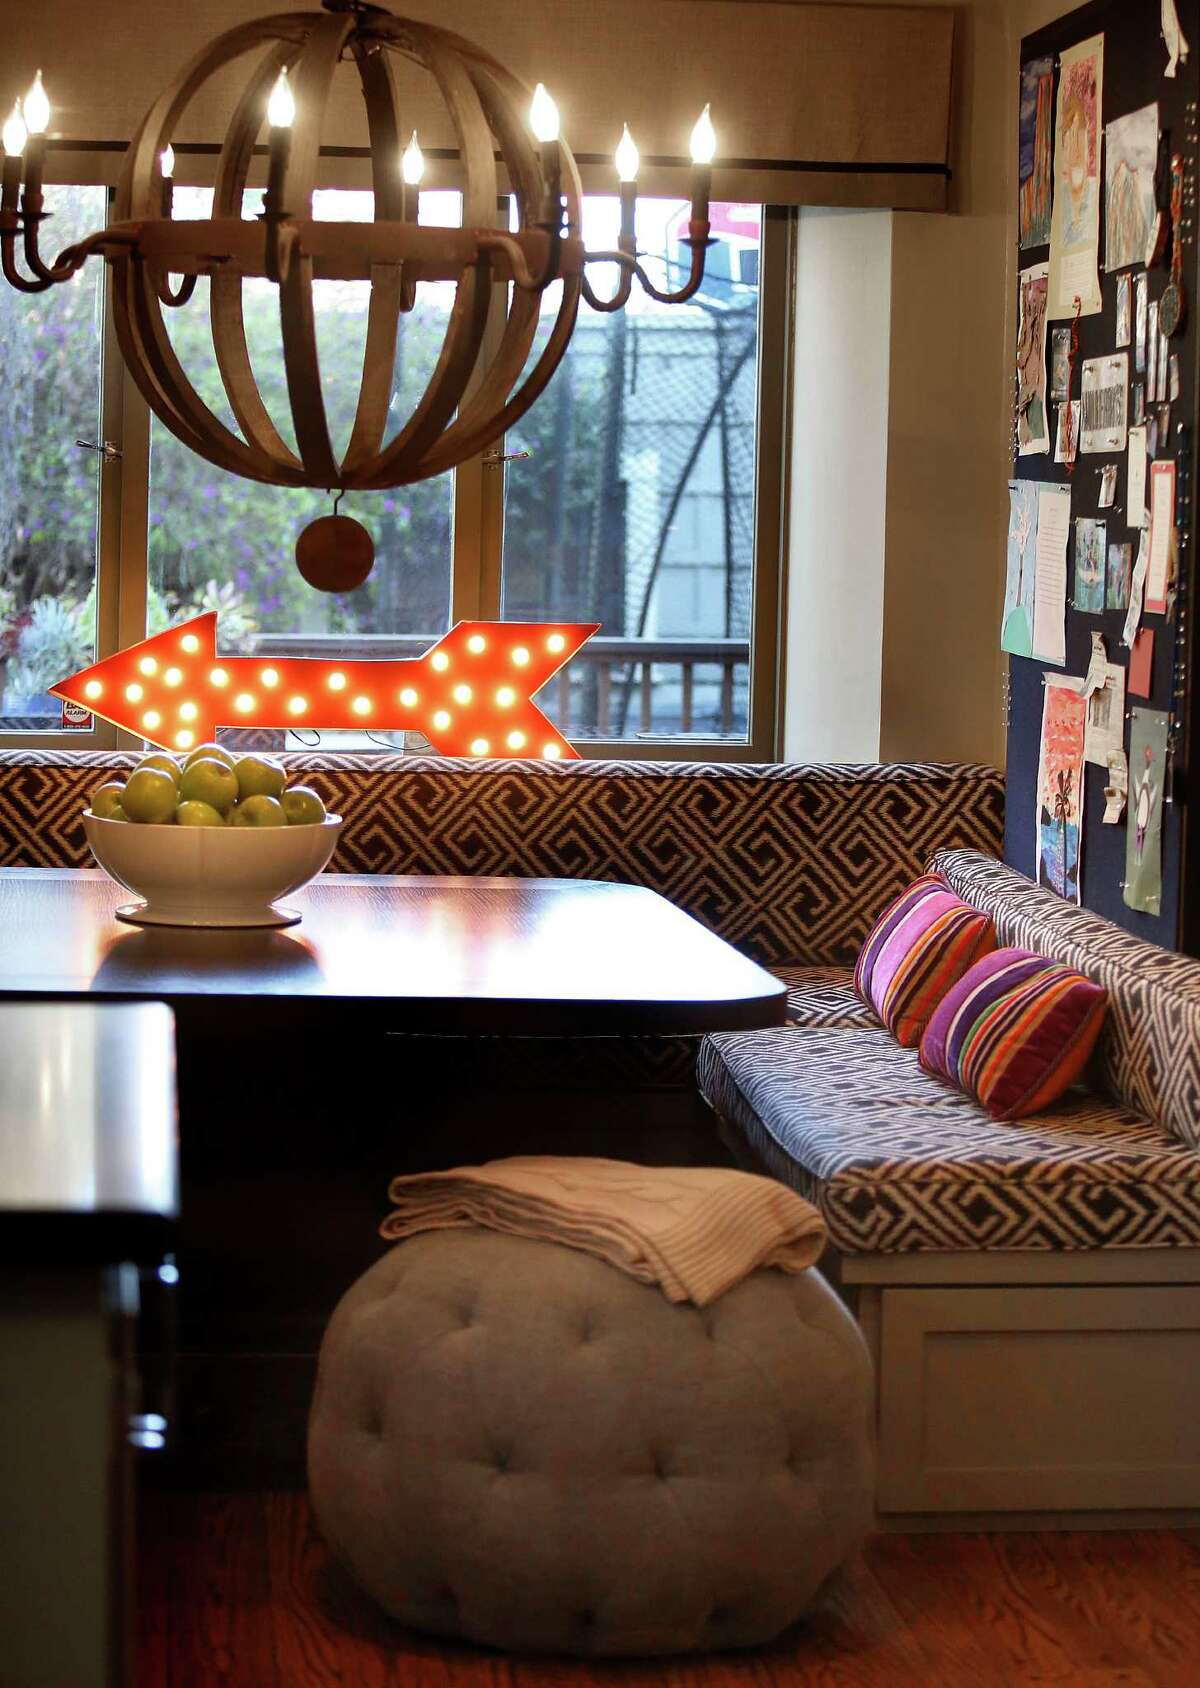 The banquette in the kitchen of Chad Olcott and Laura Pochop, who own the shop Mulberry’s Market in Piedmont, features a black-and-white ikat print with striped pillows. The chandelier, made from a wine barrel, is from Noir, and another whimsical touch is the marquee arrow from Urban Outfitters. Oatmeal linen pouf from Cisco Brothers.